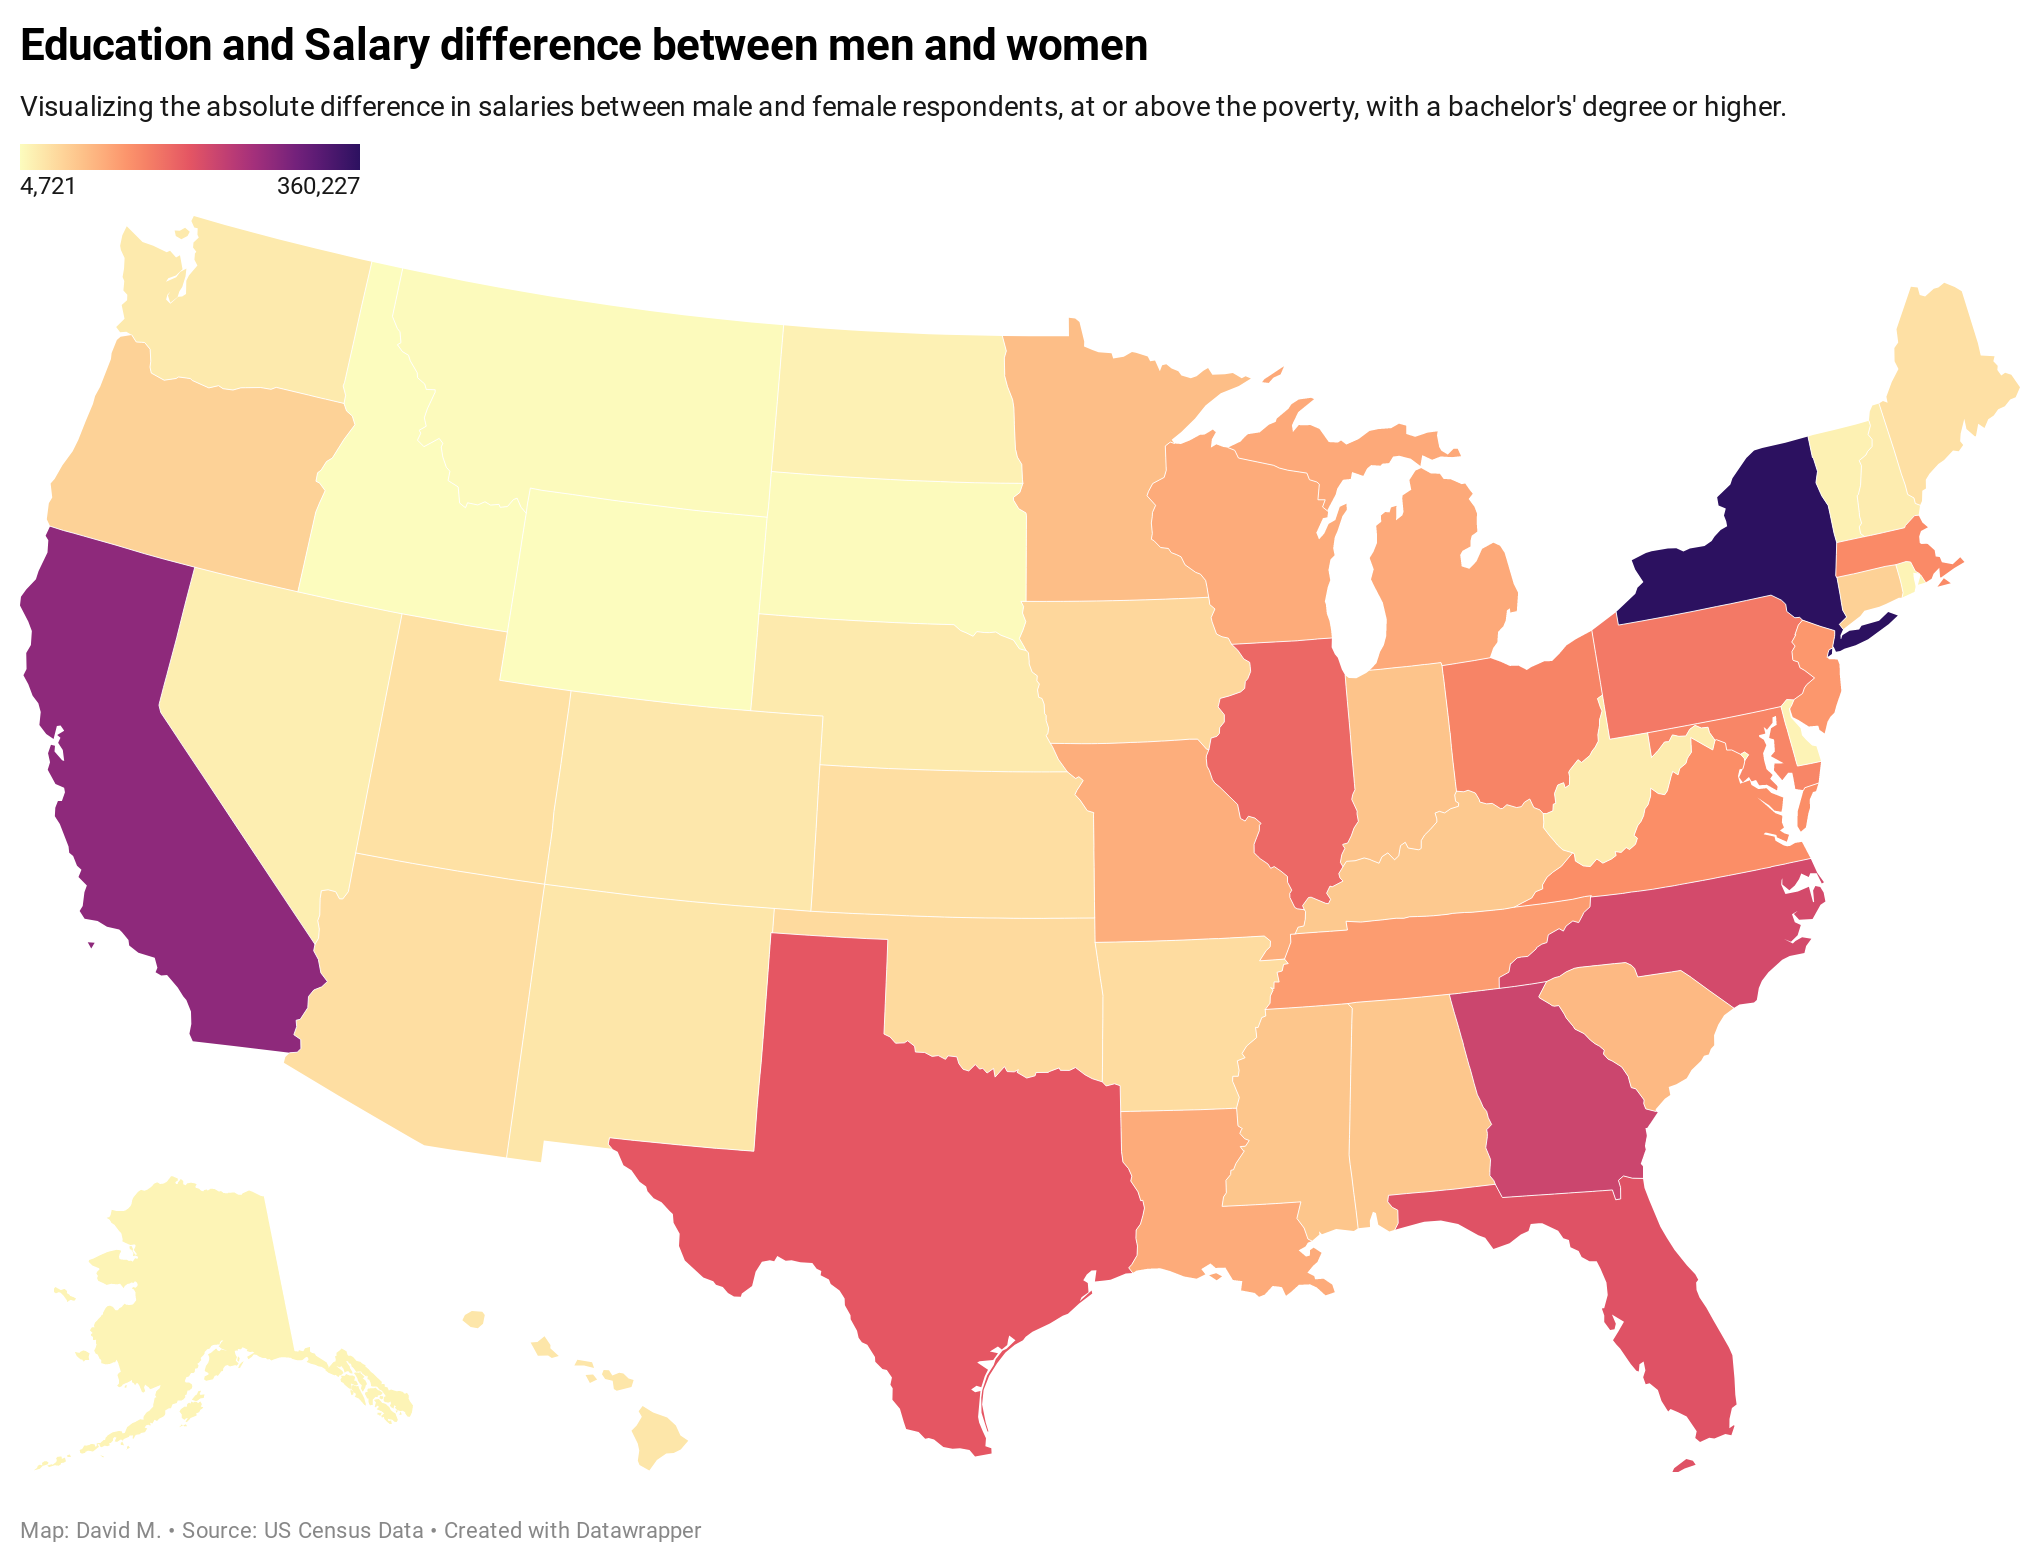 Education and Salary difference between men and women